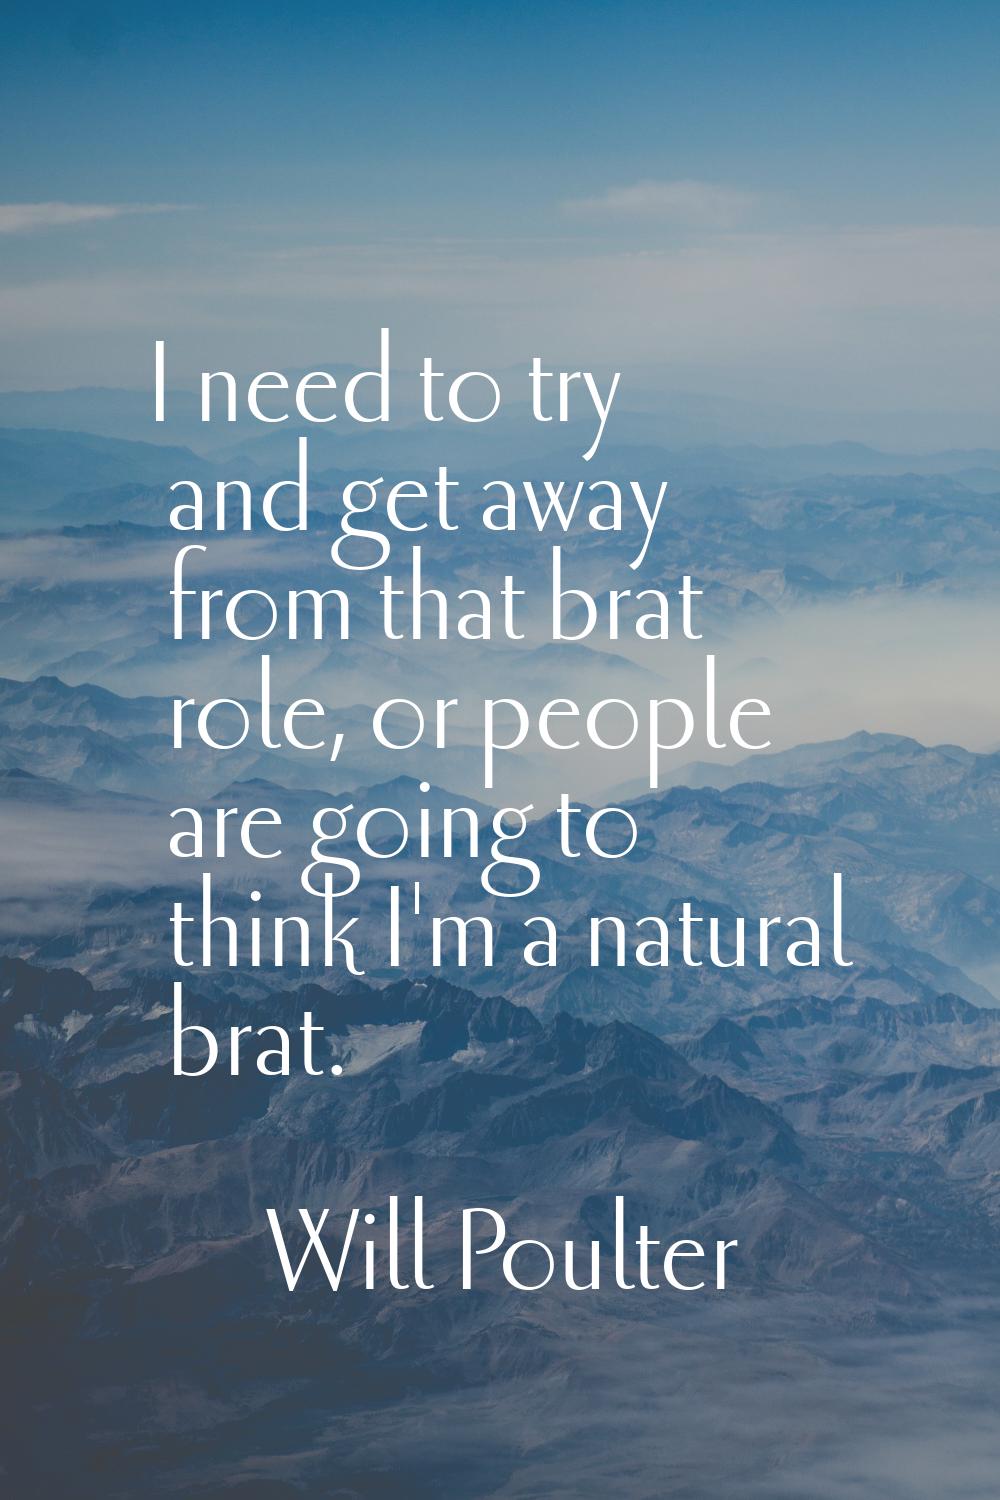 I need to try and get away from that brat role, or people are going to think I'm a natural brat.